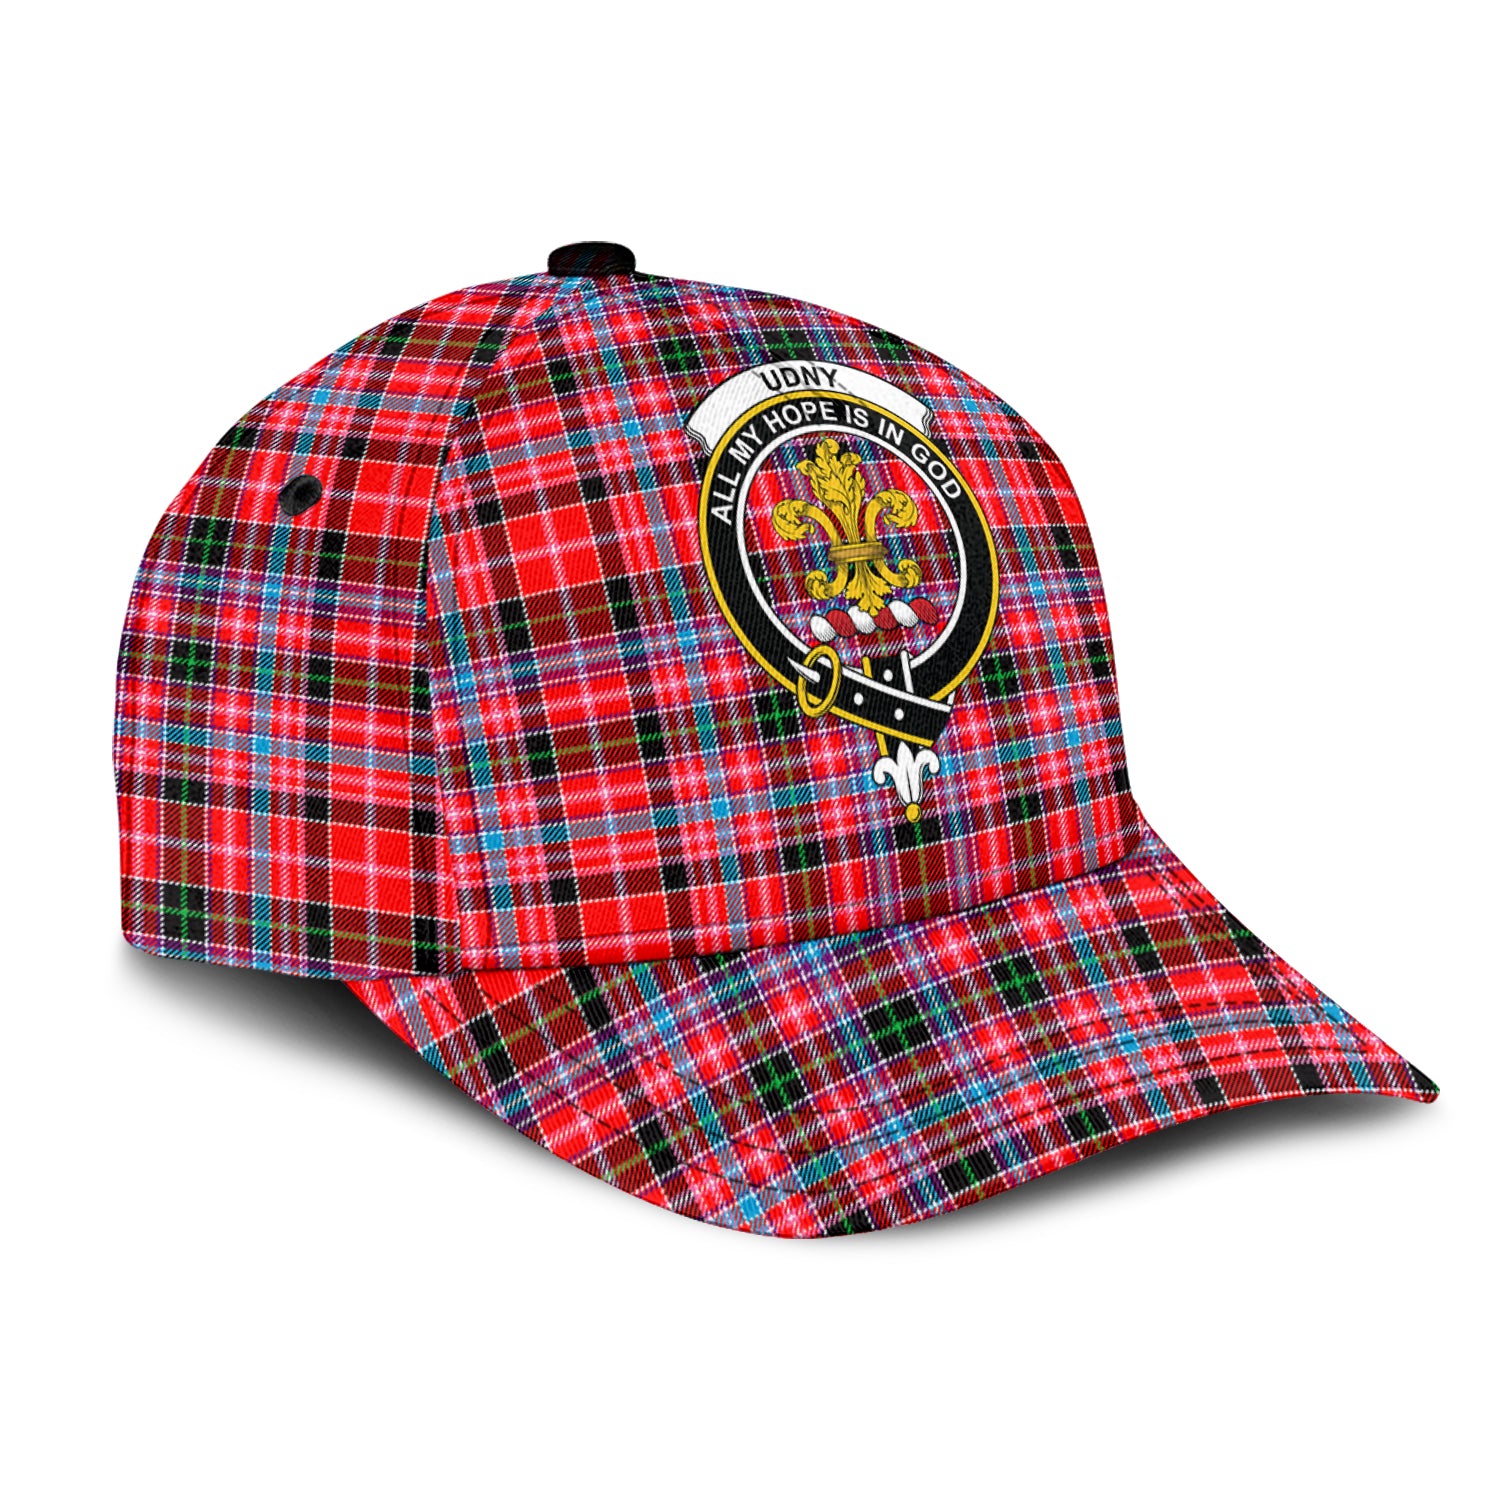 udny-tartan-classic-cap-with-family-crest